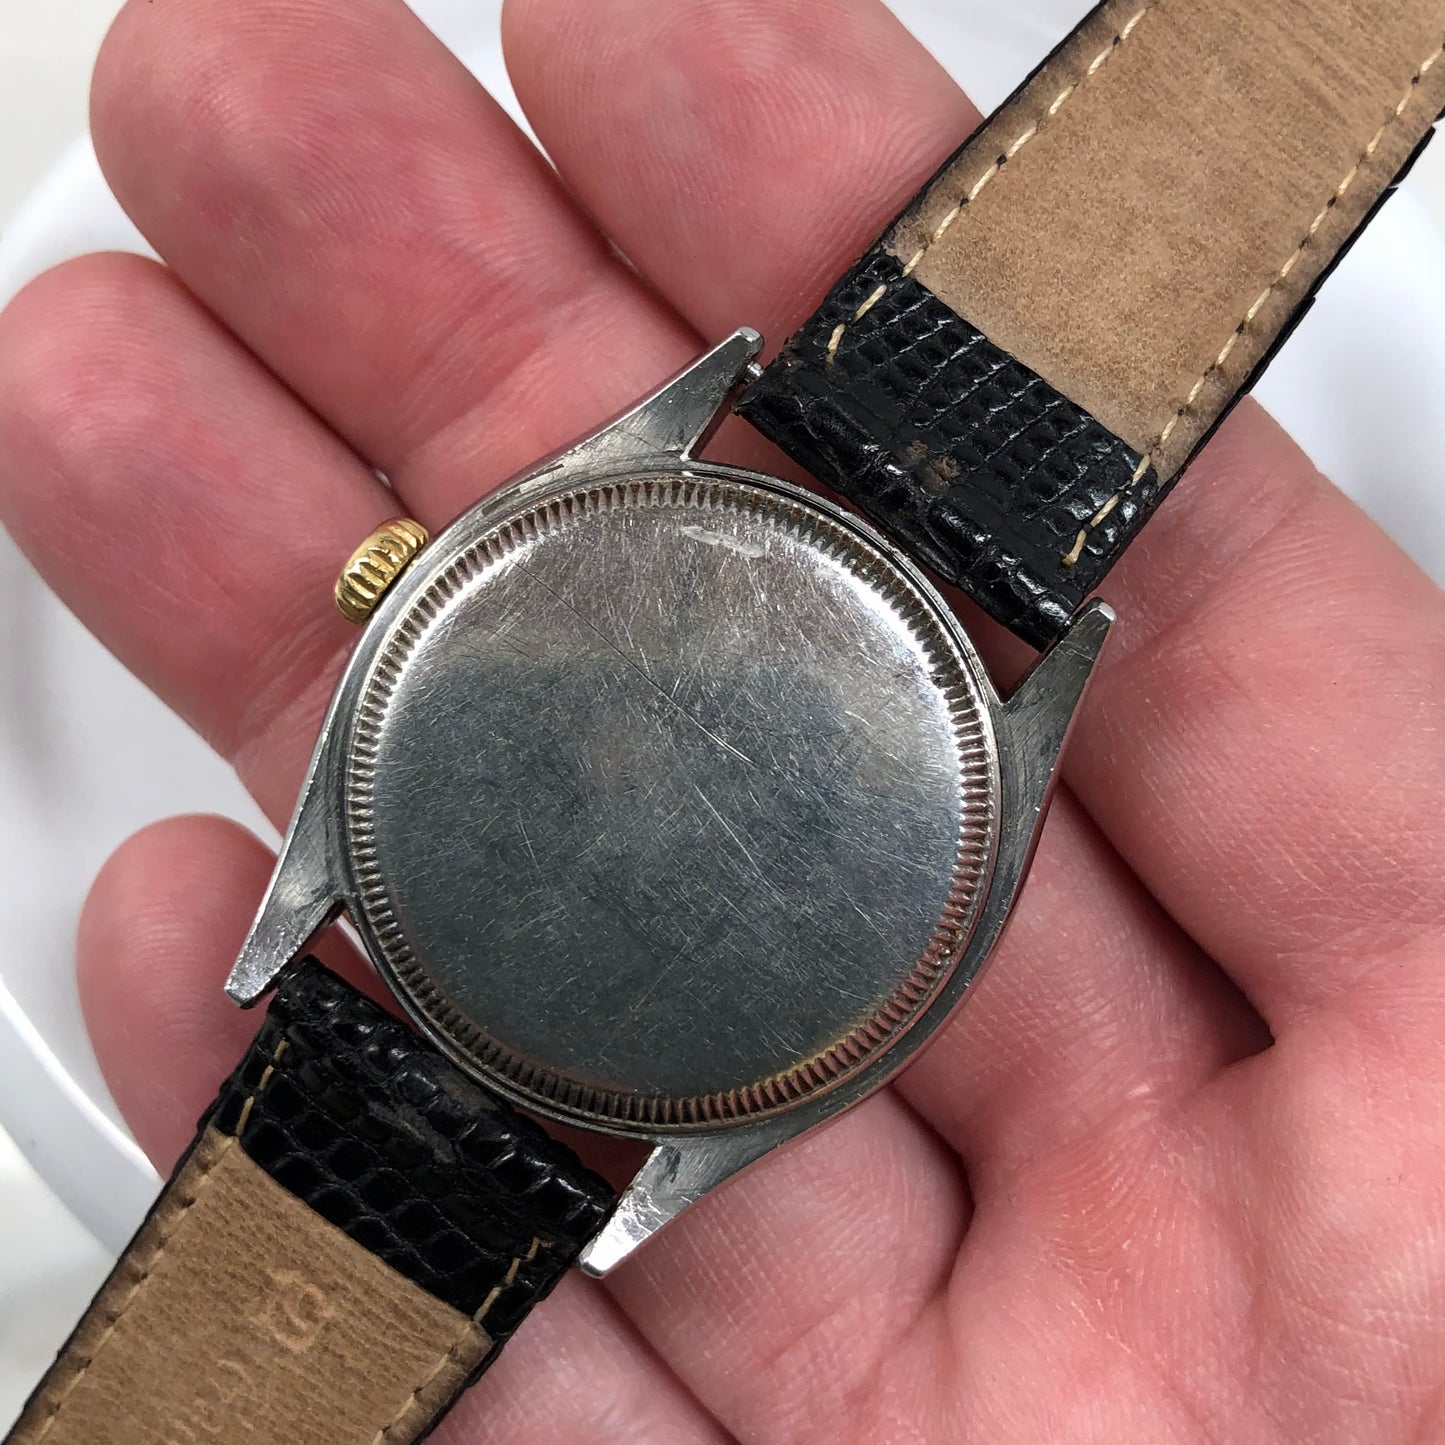 1953 Vintage Rolex 6103 Oyster Perpetual Ovettone Stainless Steel Gold Engine Turned Bezel Wristwatch - Hashtag Watch Company